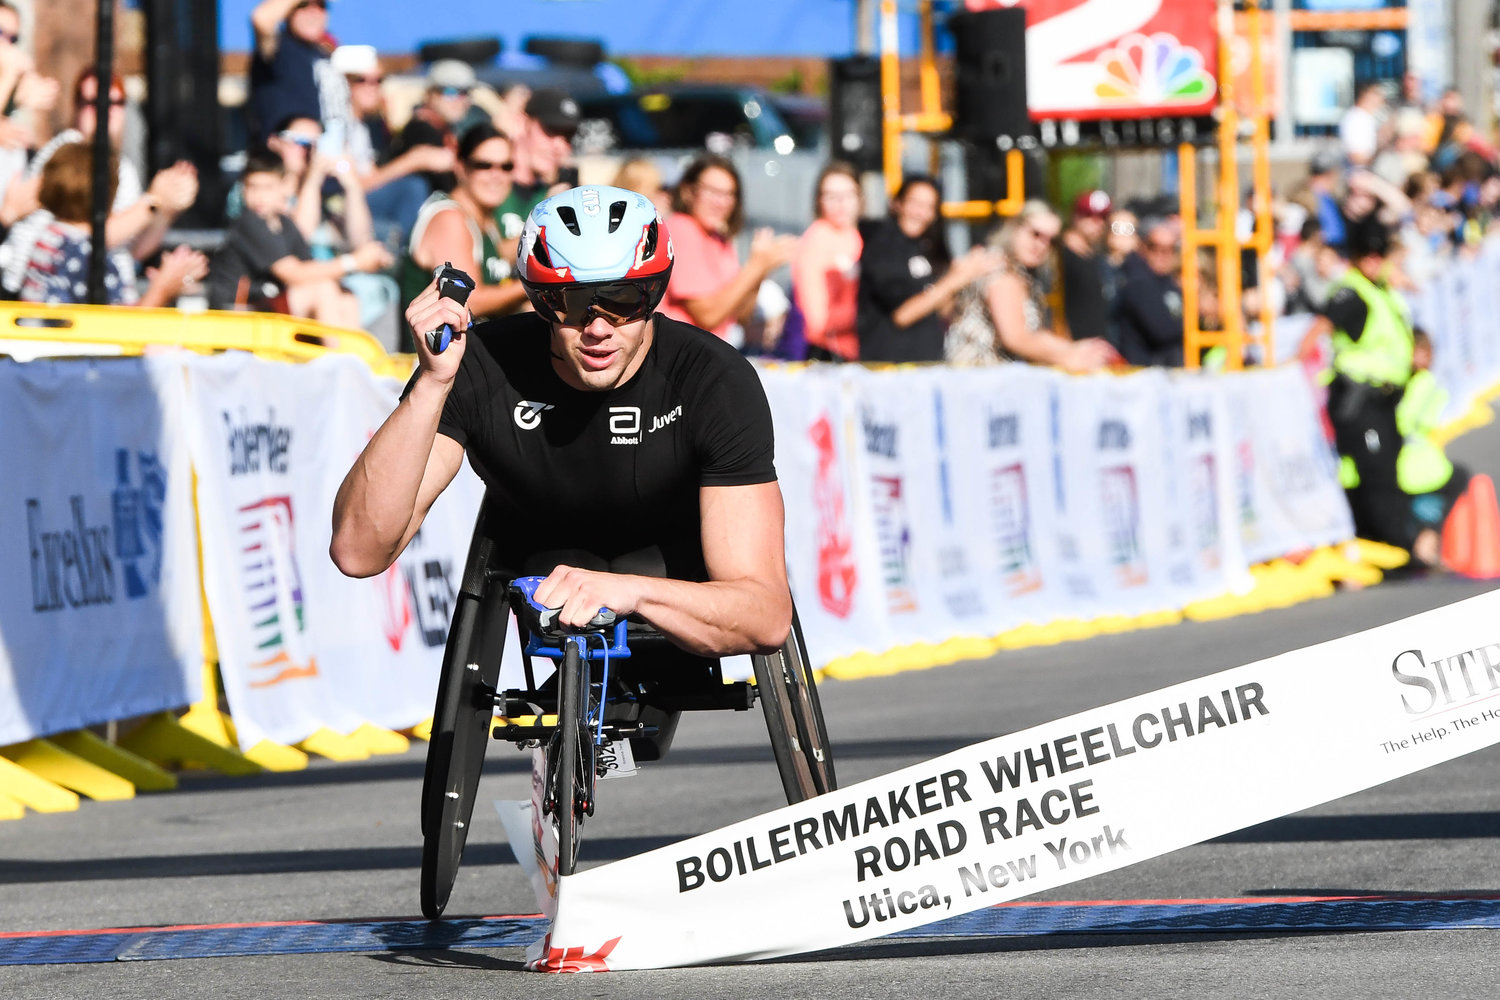 On Sunday, Daniel Romanchuk won the men's wheelchair 15K at 45th Boilermaker Road Race in Utica. It was the fifth Boilermaker win for the 23-year-old. His time of 31:32:23 surpasses his previous record in the Boilermaker of 31:45.